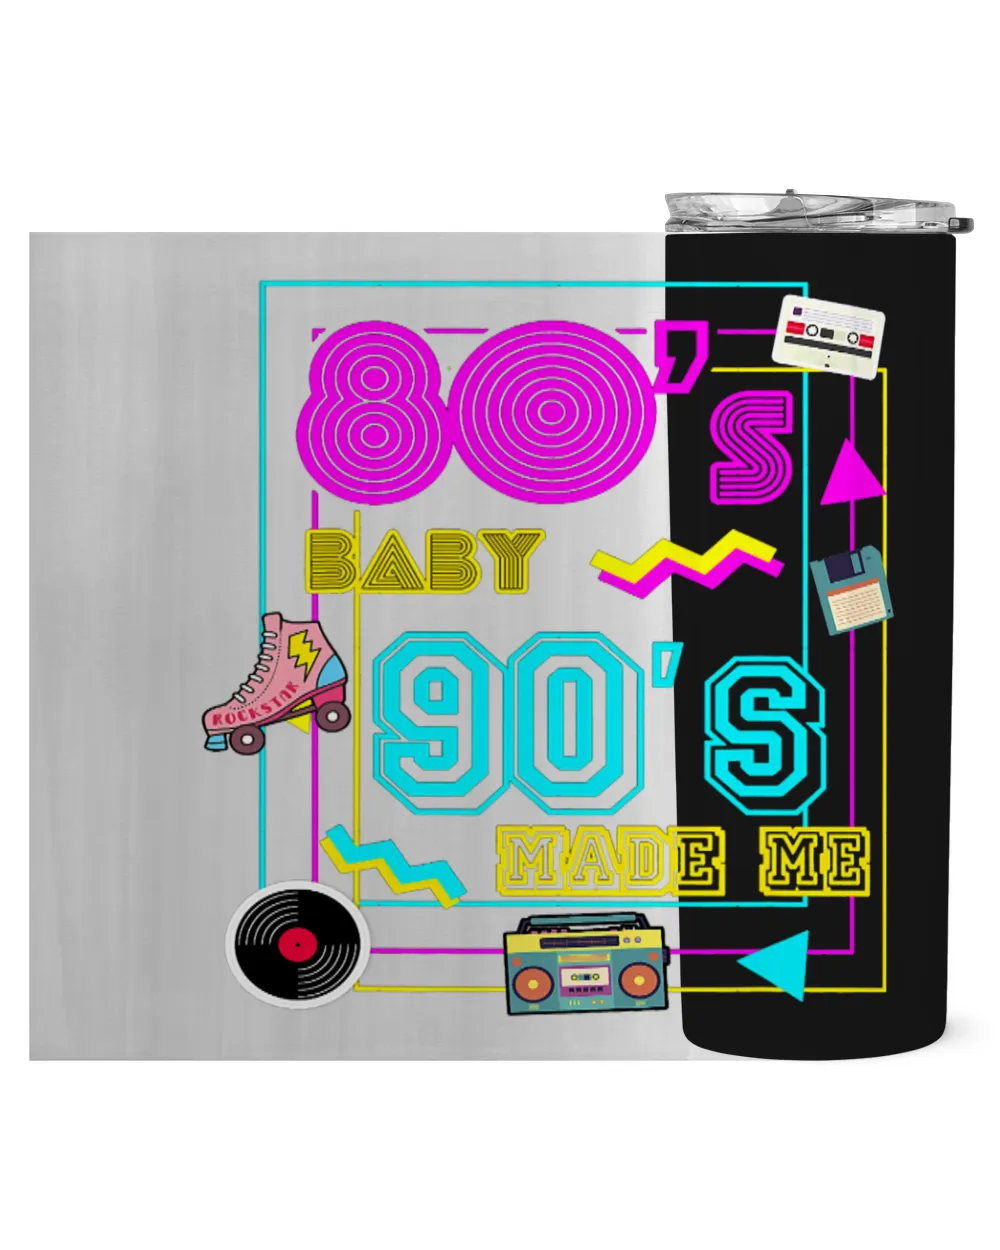 1980s 80s Baby 1990s 90s Outfit Costume Retro Party Theme